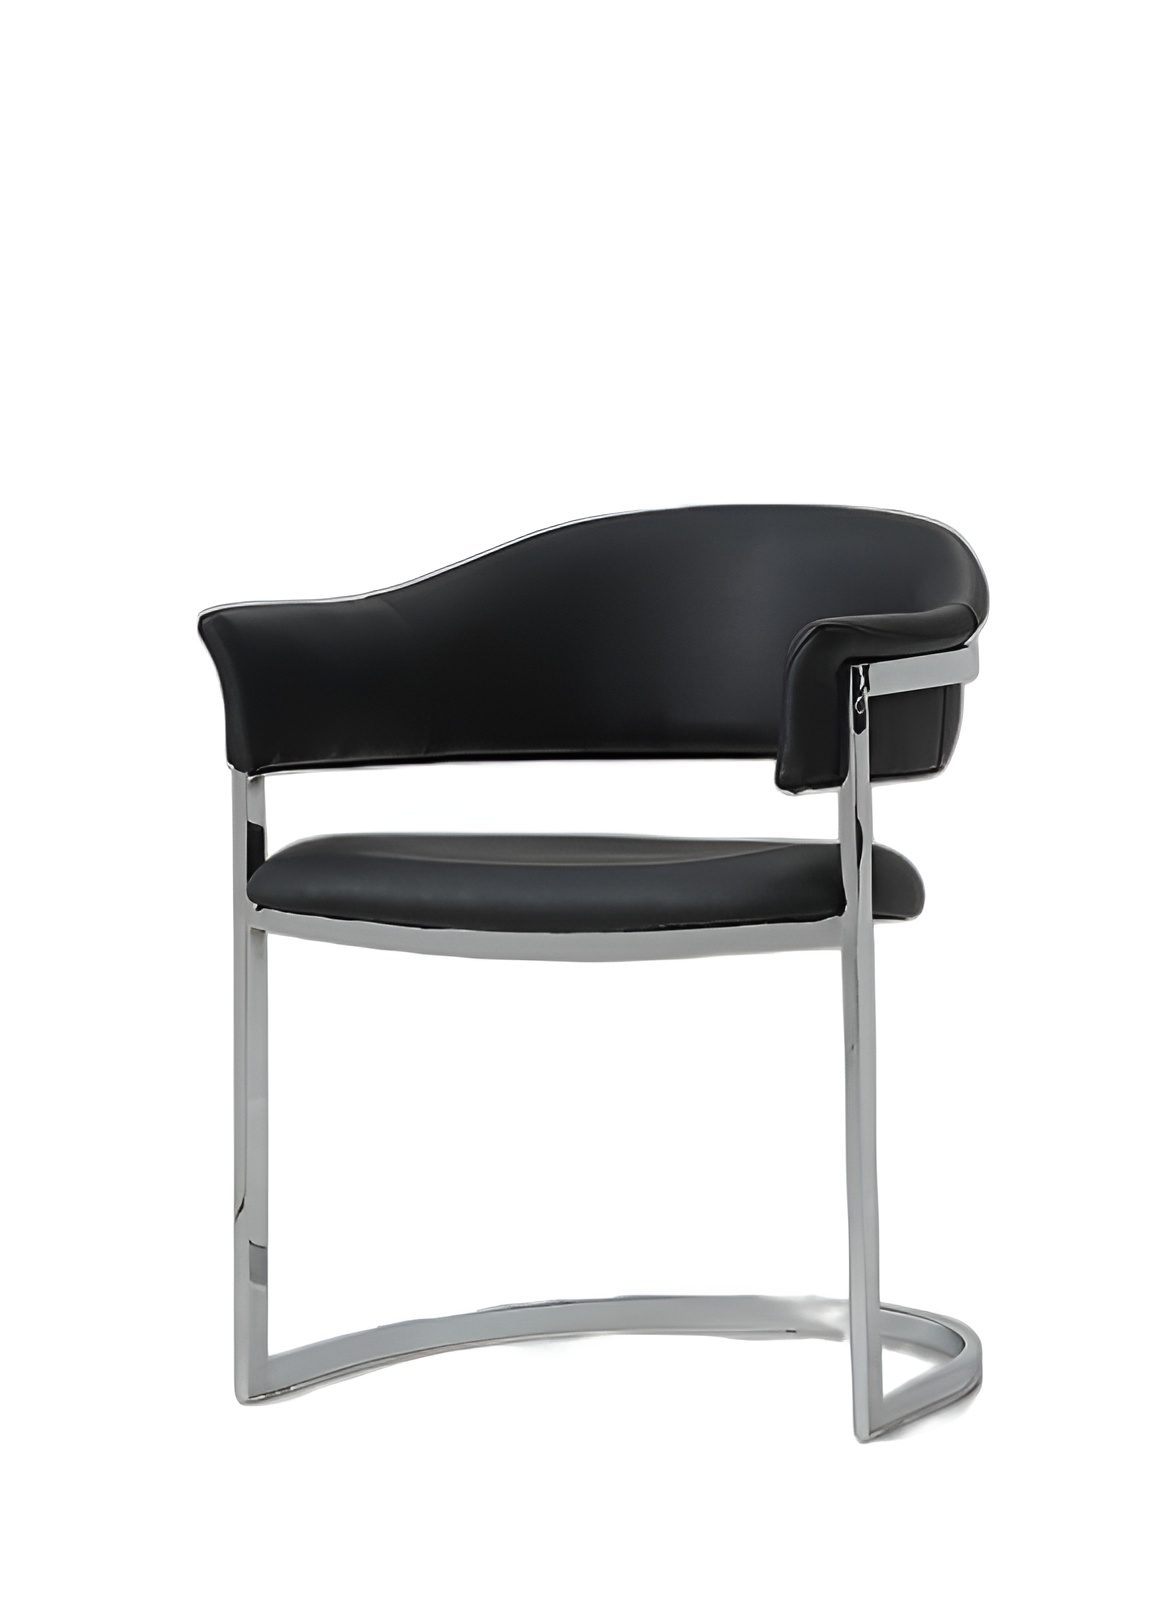 30" Black Leatherette And Stainless Steel Dining Chair-284242-1